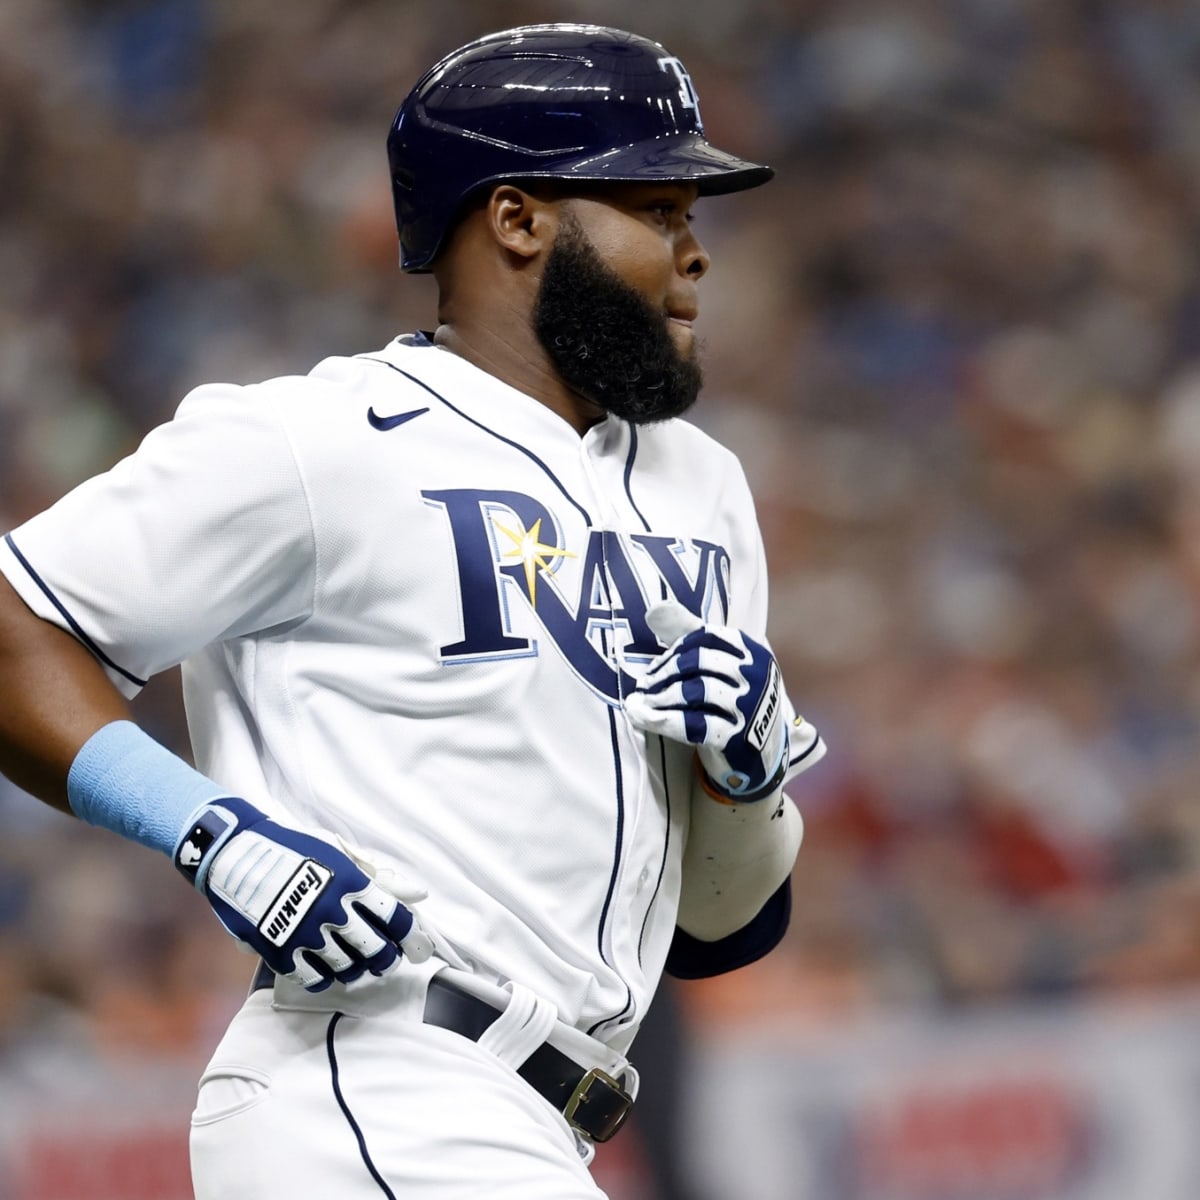 MLB rumors: Rays open to trading Austin Meadows; Mariners haven